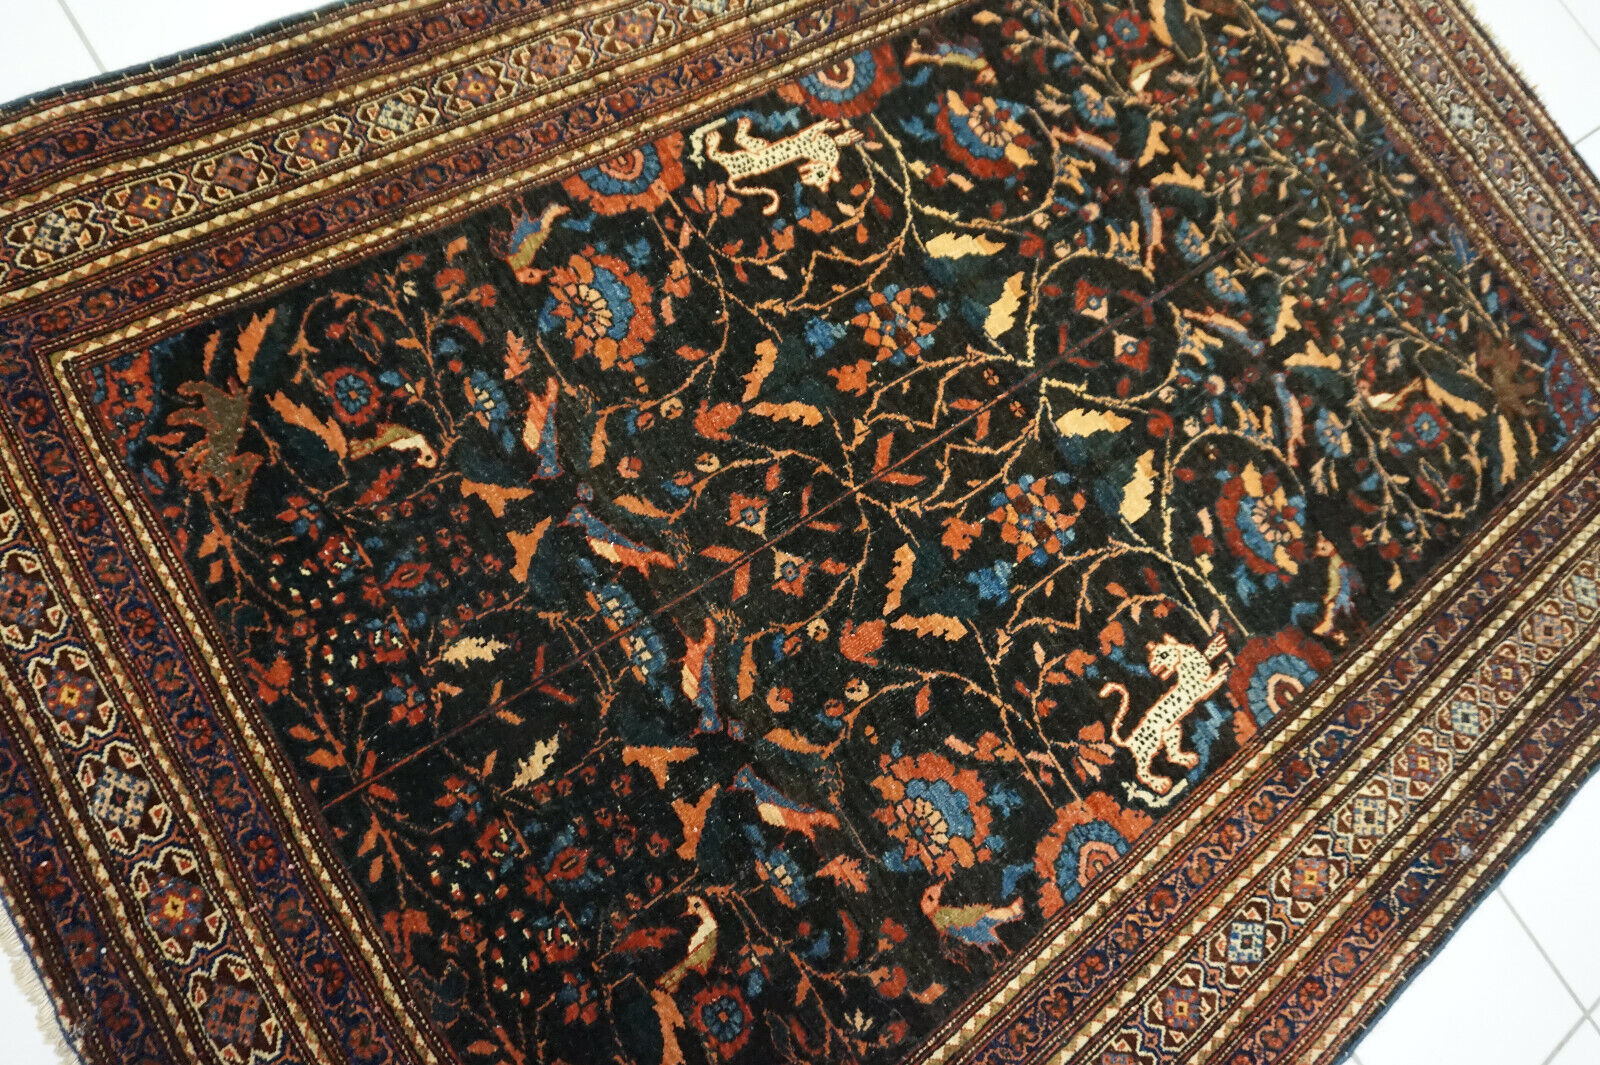 Side angle shot of the Handmade Antique Persian Tehran Rug showcasing size and scale